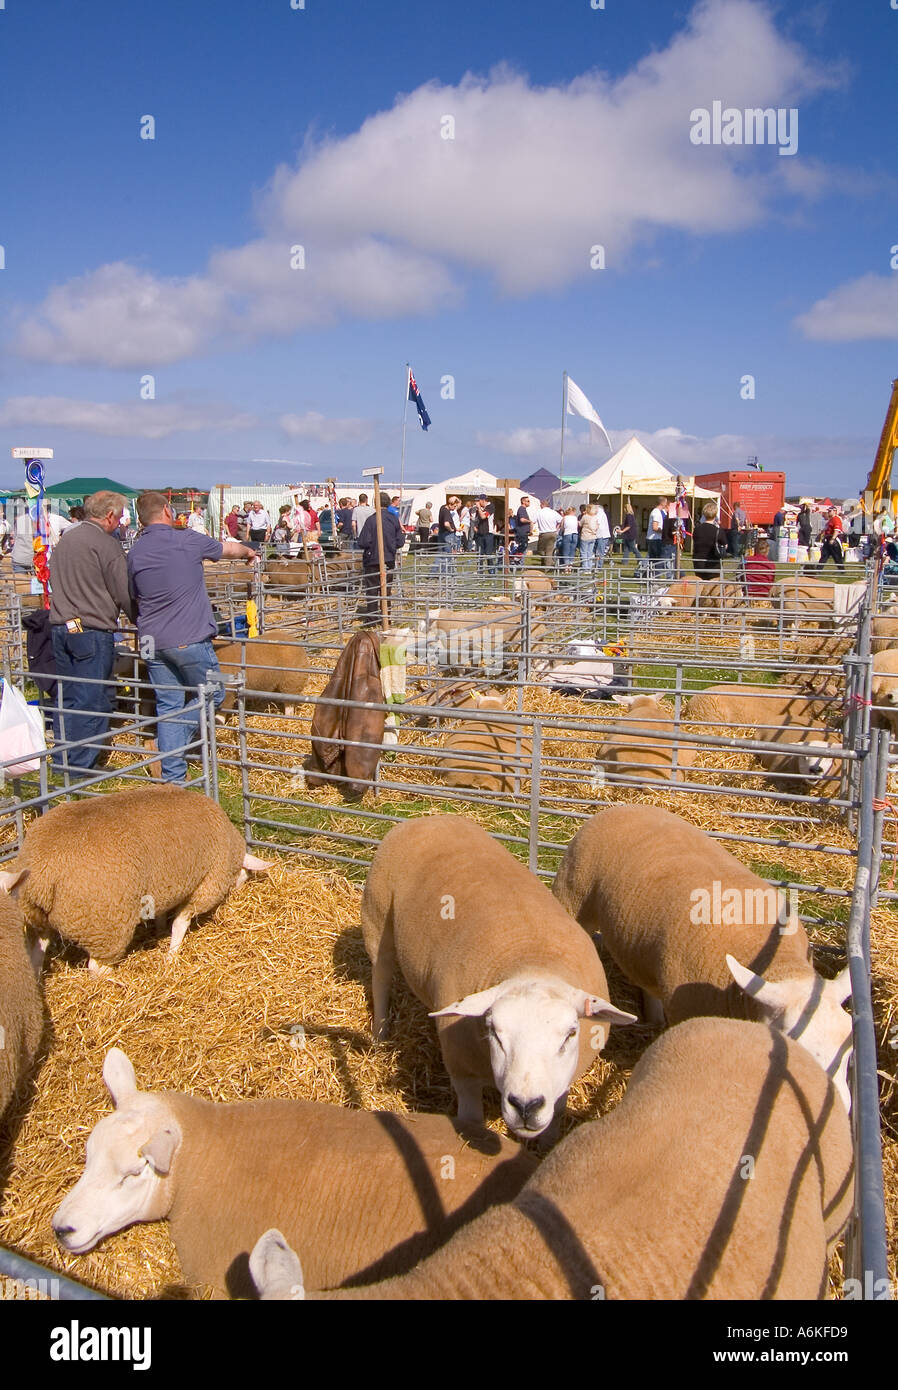 dh County Show KIRKWALL ORKNEY Display of Texel gimmer ewe sheep in livestock pen show ground agriculture farm pens flock uk Stock Photo